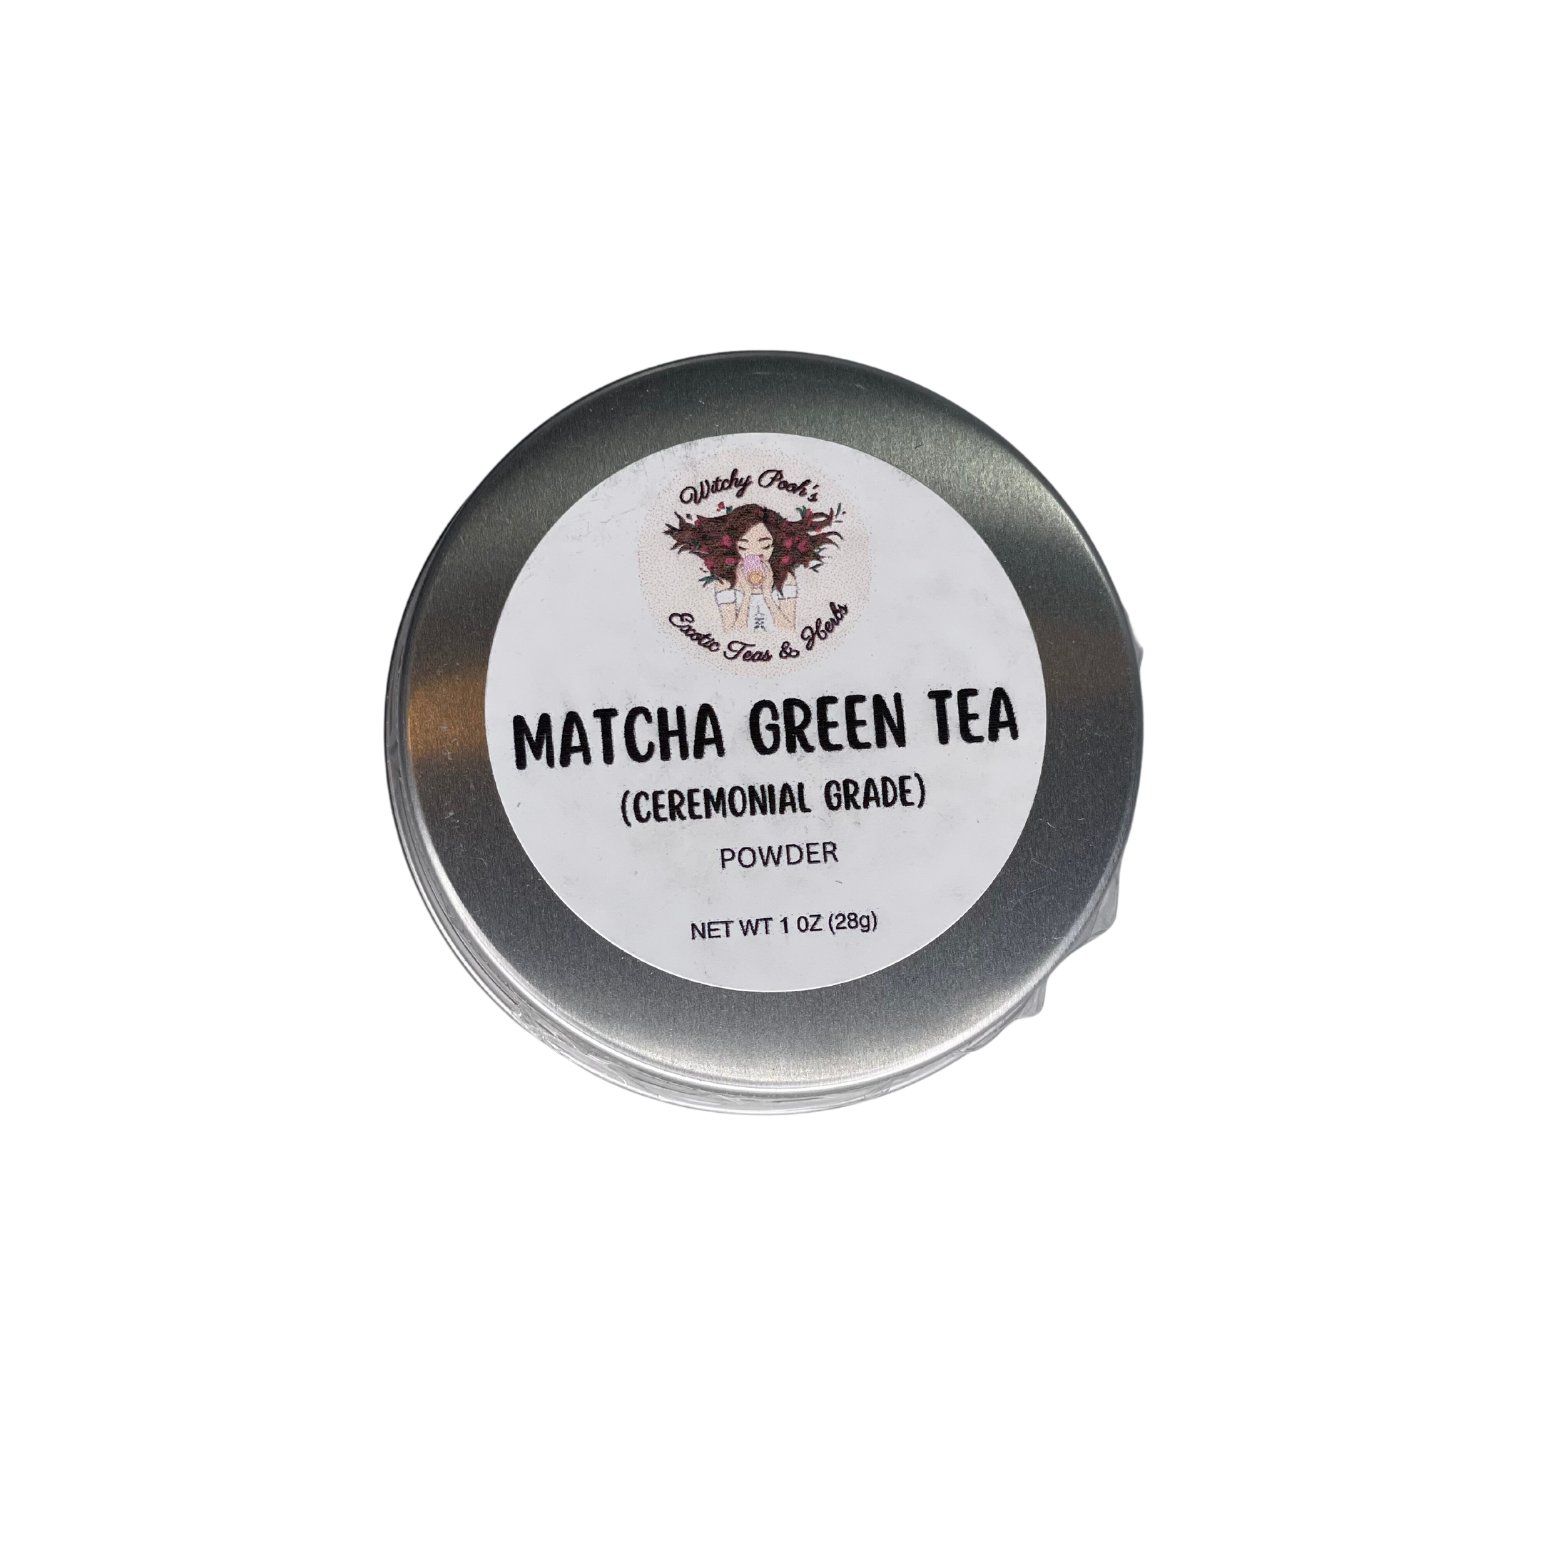 Witchy Pooh's Matcha Green Tea Powder, Ceremonial Grade, High Quality, Vibrate Green Color-5